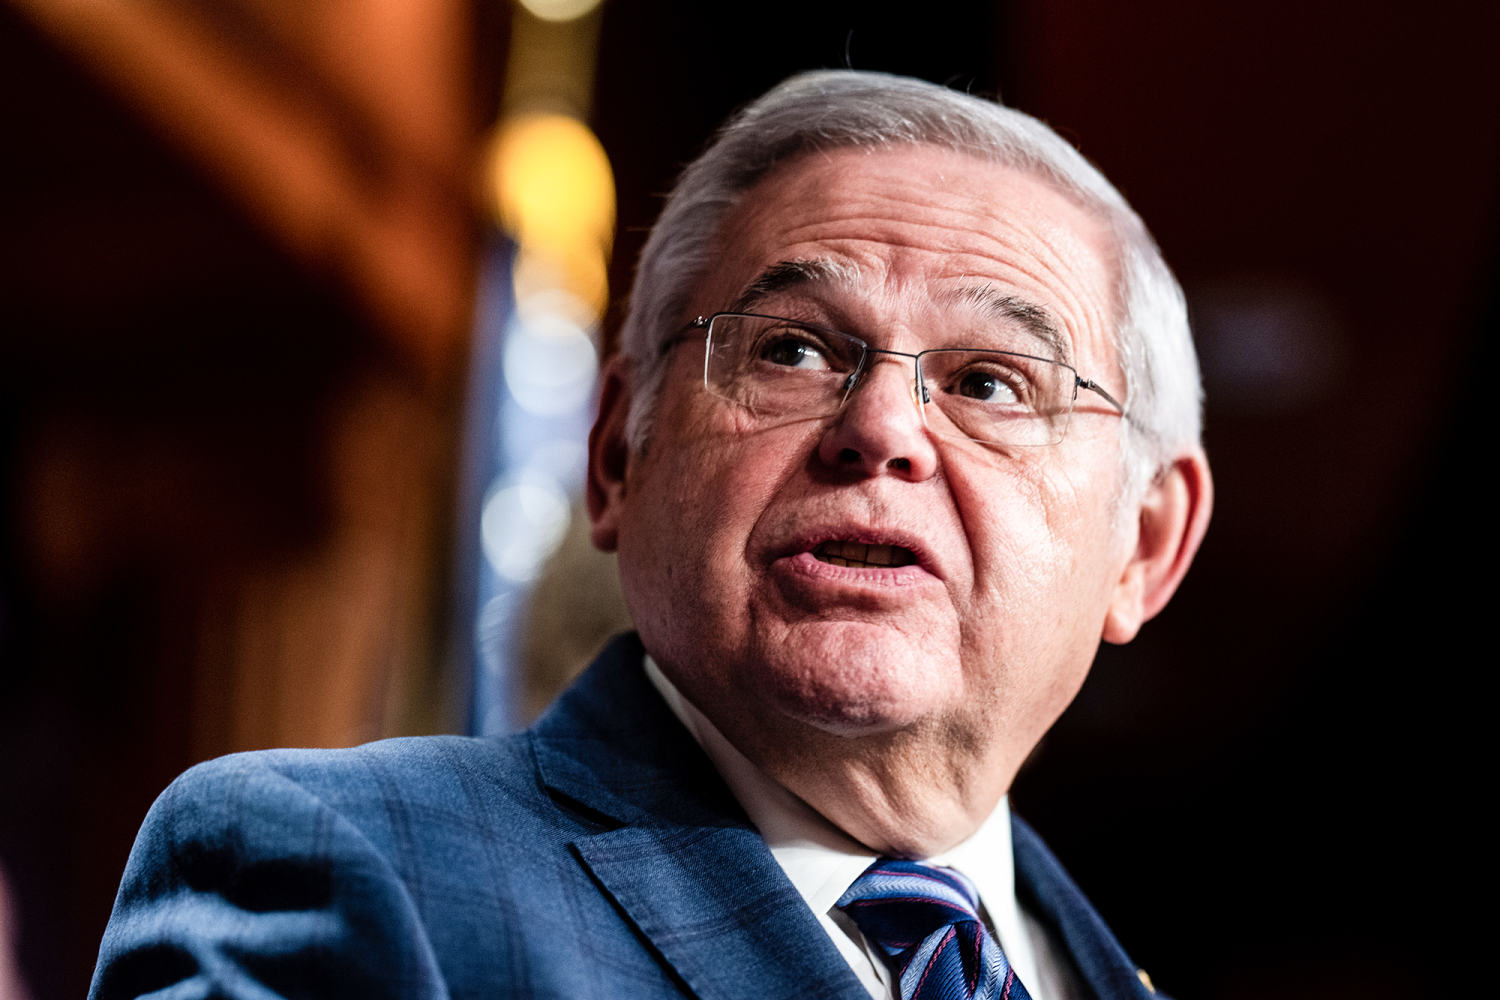 Indicted Sen. Bob Menendez to officially file for re-election as an independent